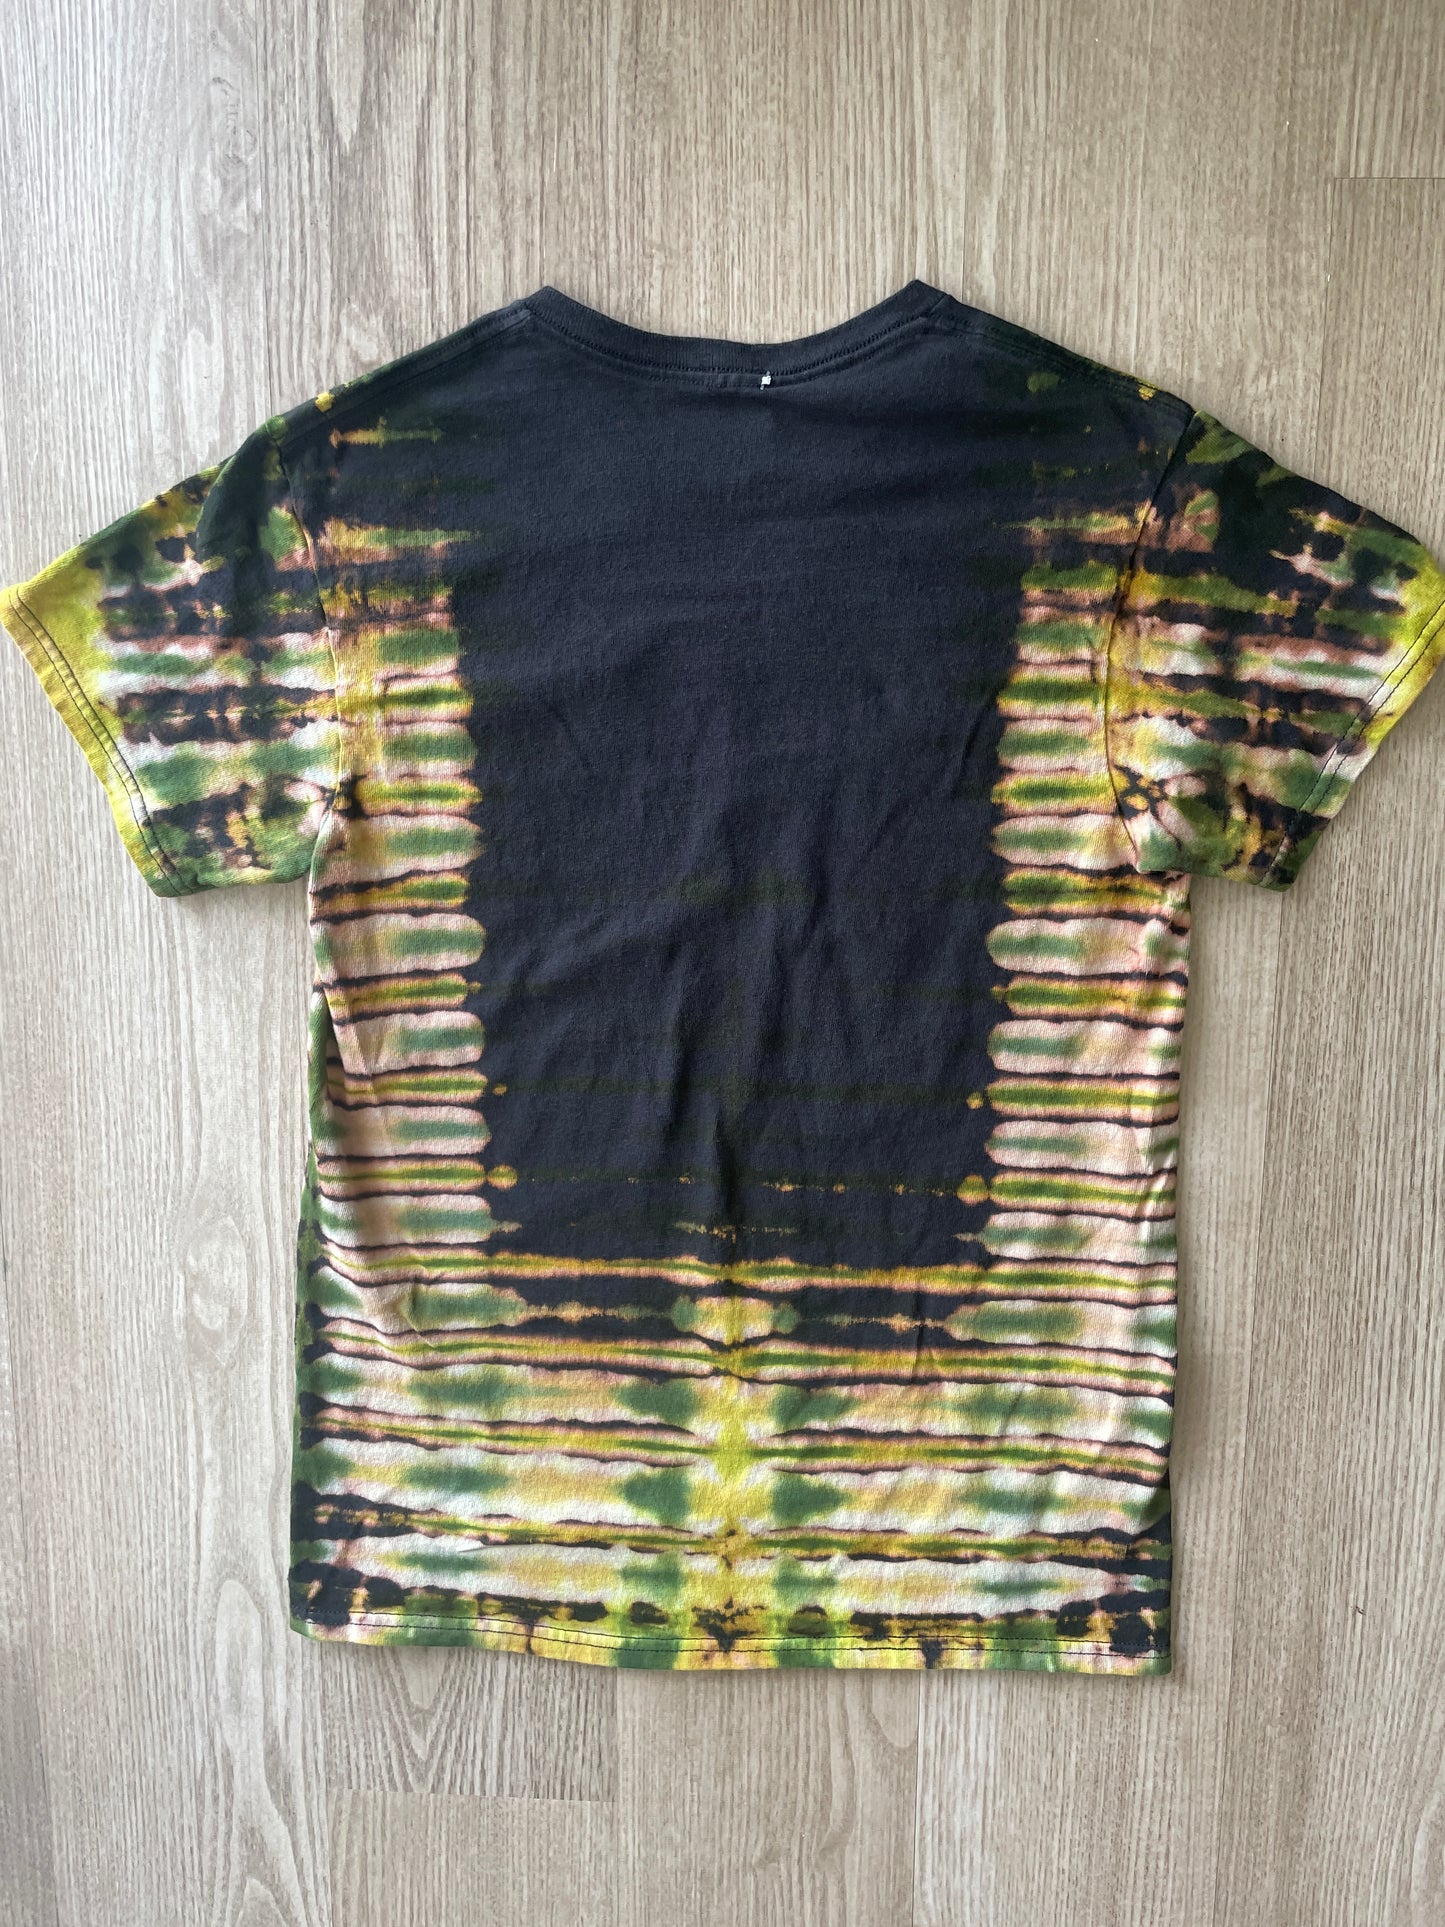 SMALL Men’s Tupac Poetic Justice Reverse Tie Dye T-Shirt | One-Of-a-Kind Black and Green Pleated Short Sleeve